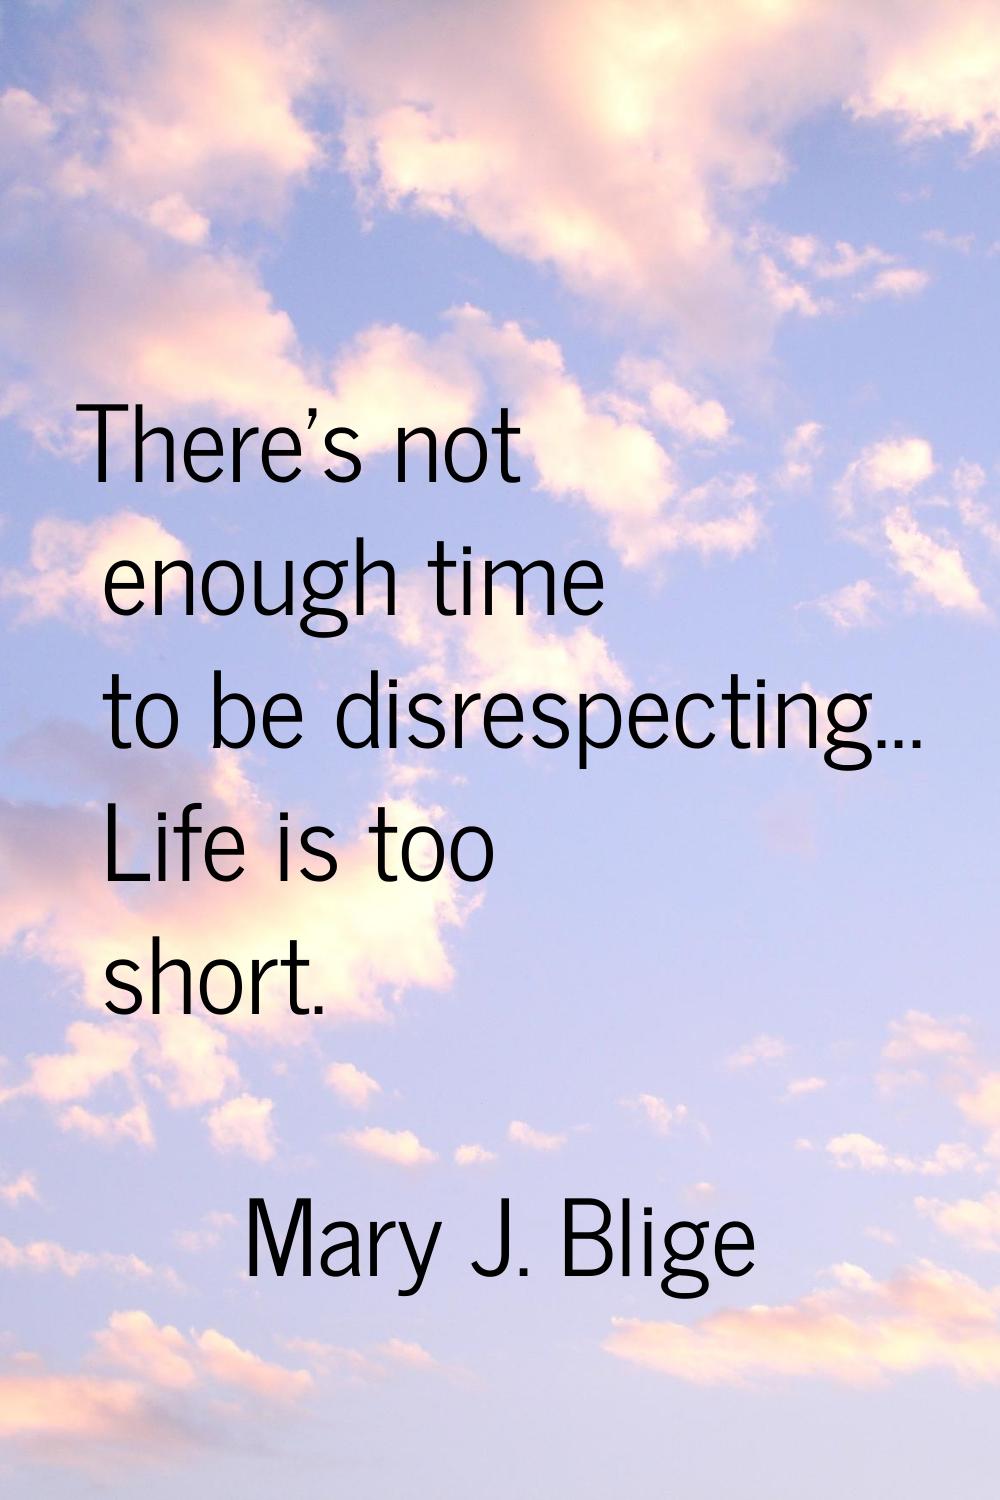 There's not enough time to be disrespecting... Life is too short.